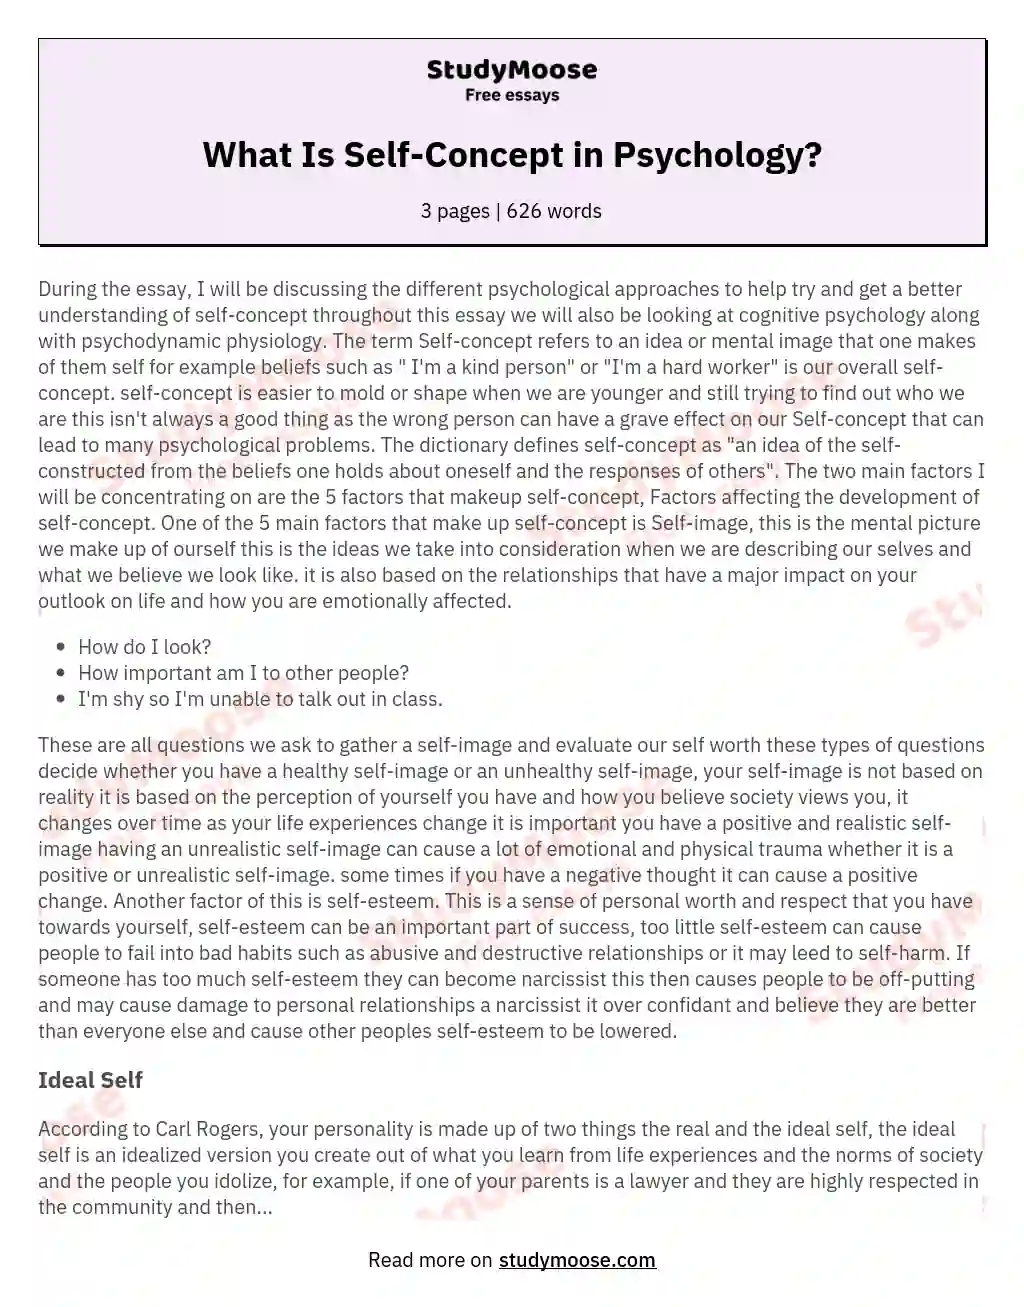 What Is Self-Concept in Psychology? essay